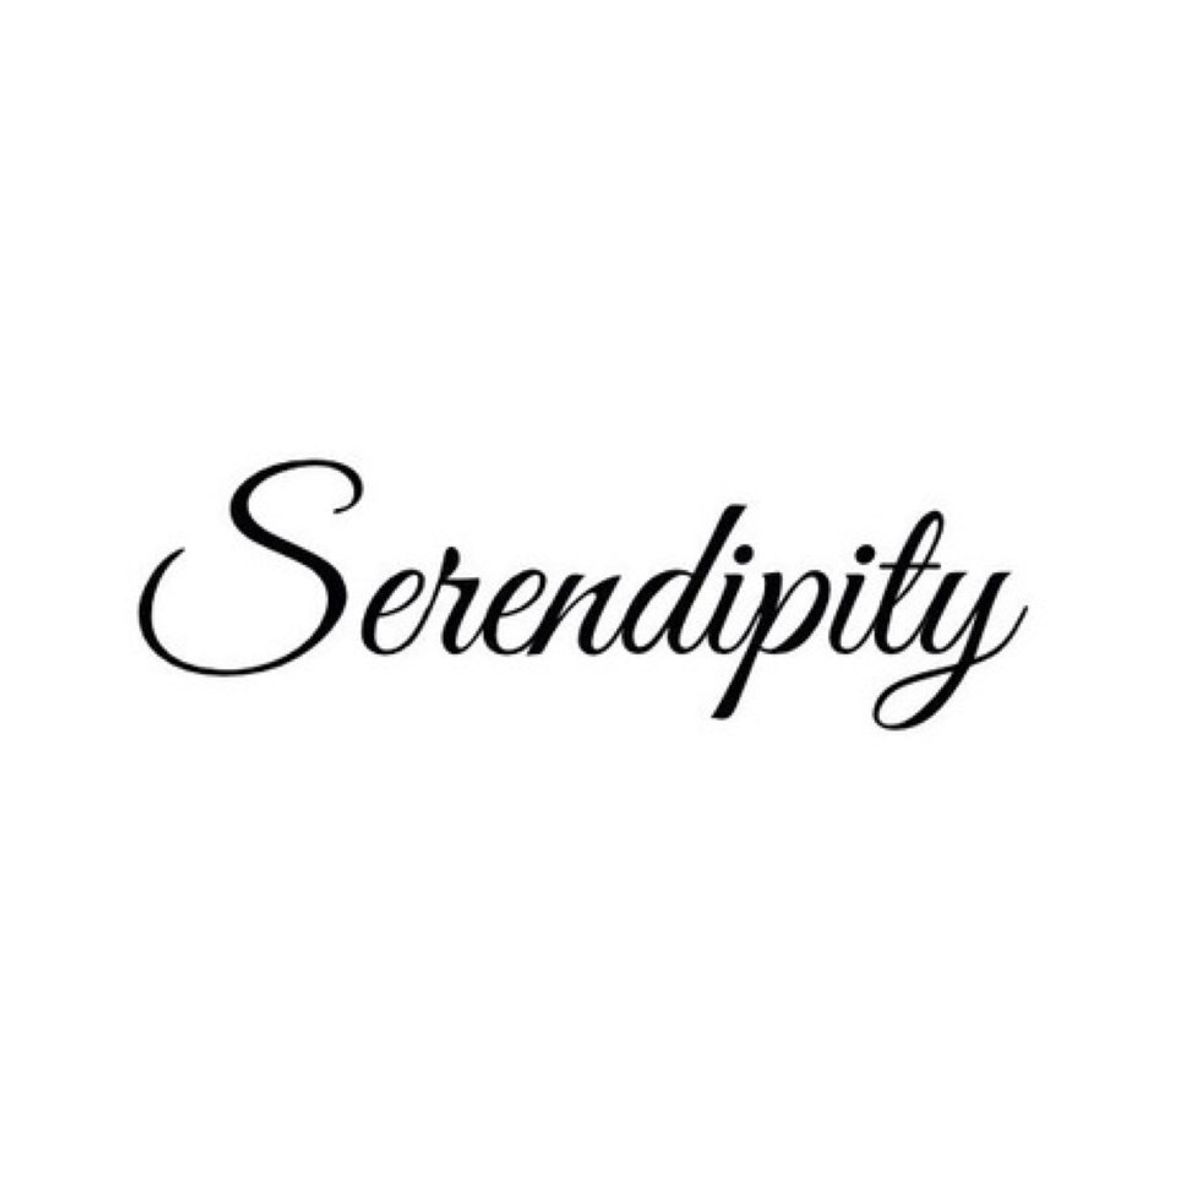 Sorry, Serendipity Made Me Do It